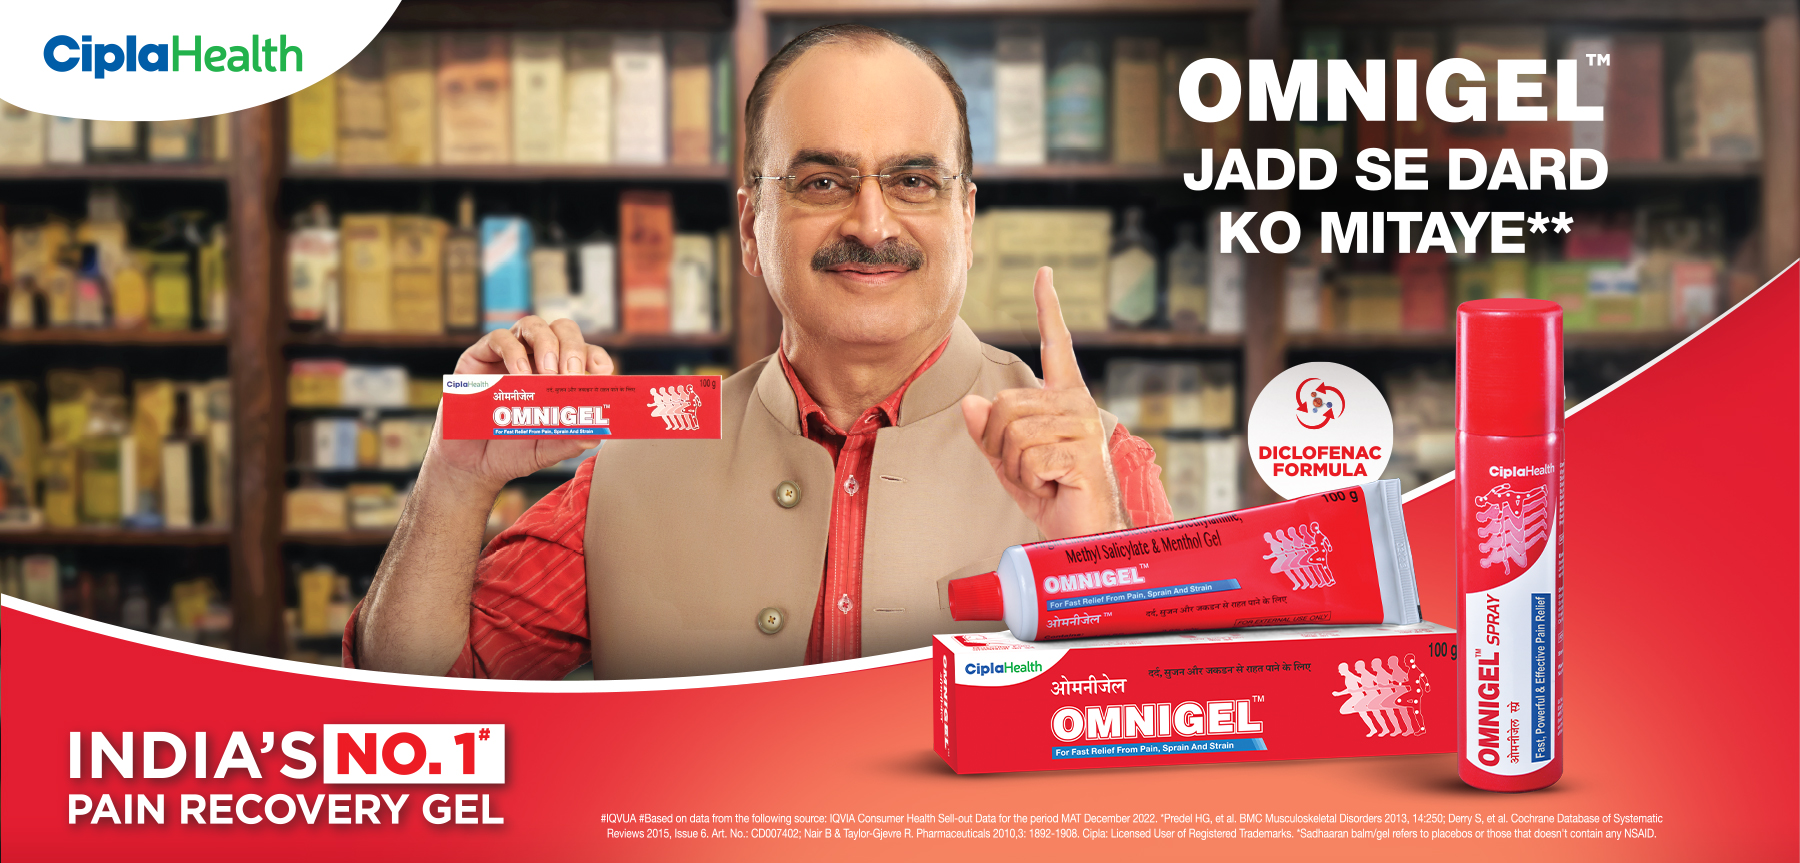 Omnigel pain relief ointment